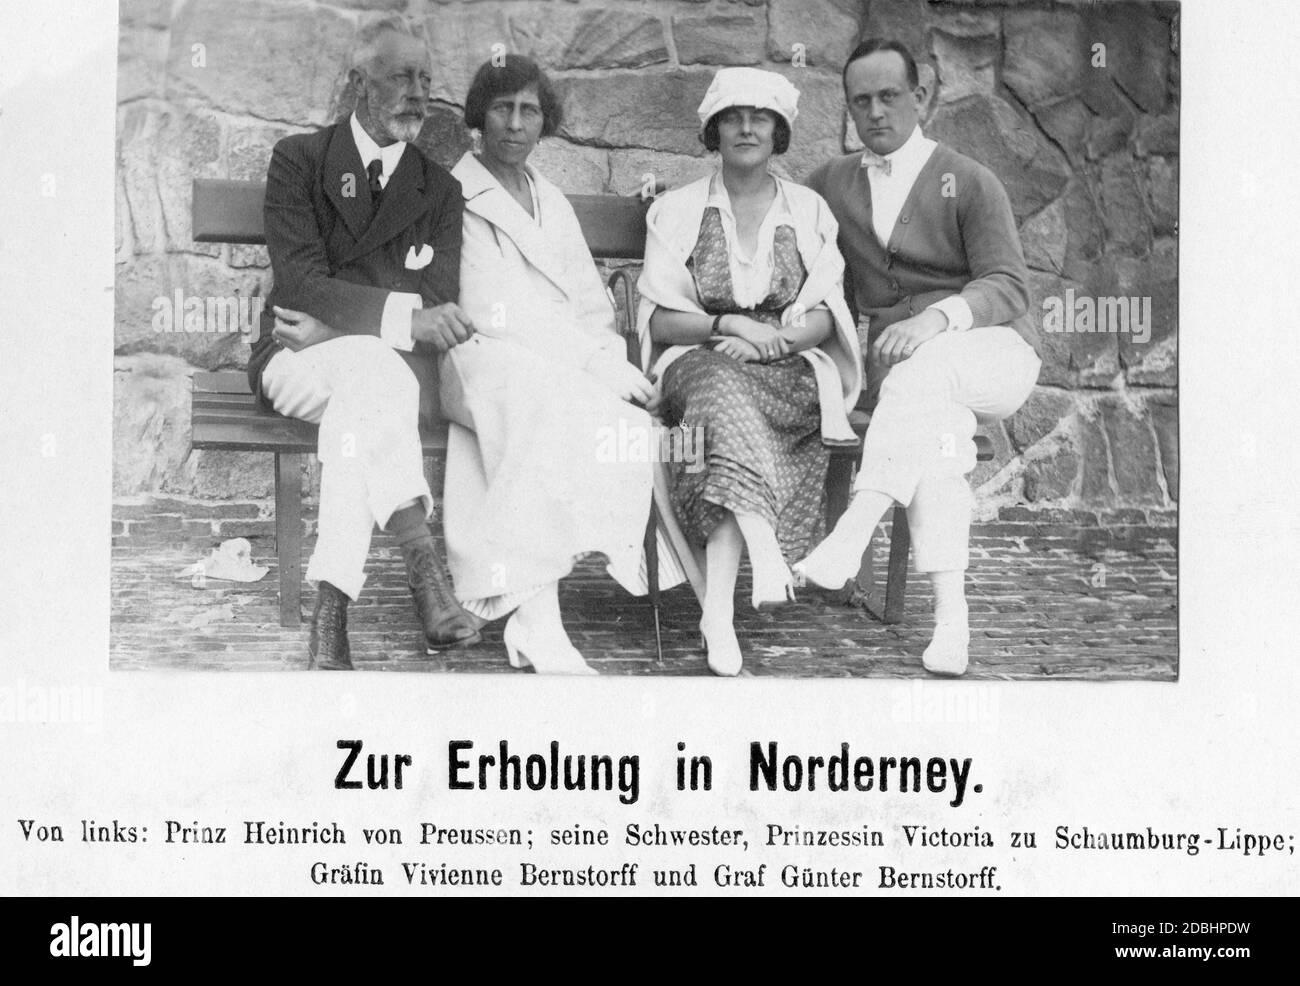 From left to right: Prince Henry of Prussia, Princess Viktoria of Schaumburg-Lippe (nee Prussia), Countess Vivienne Bernstorff and Count Guenter Bernstorff. They are on holiday in Norderney on the East Frisian Islands. Stock Photo